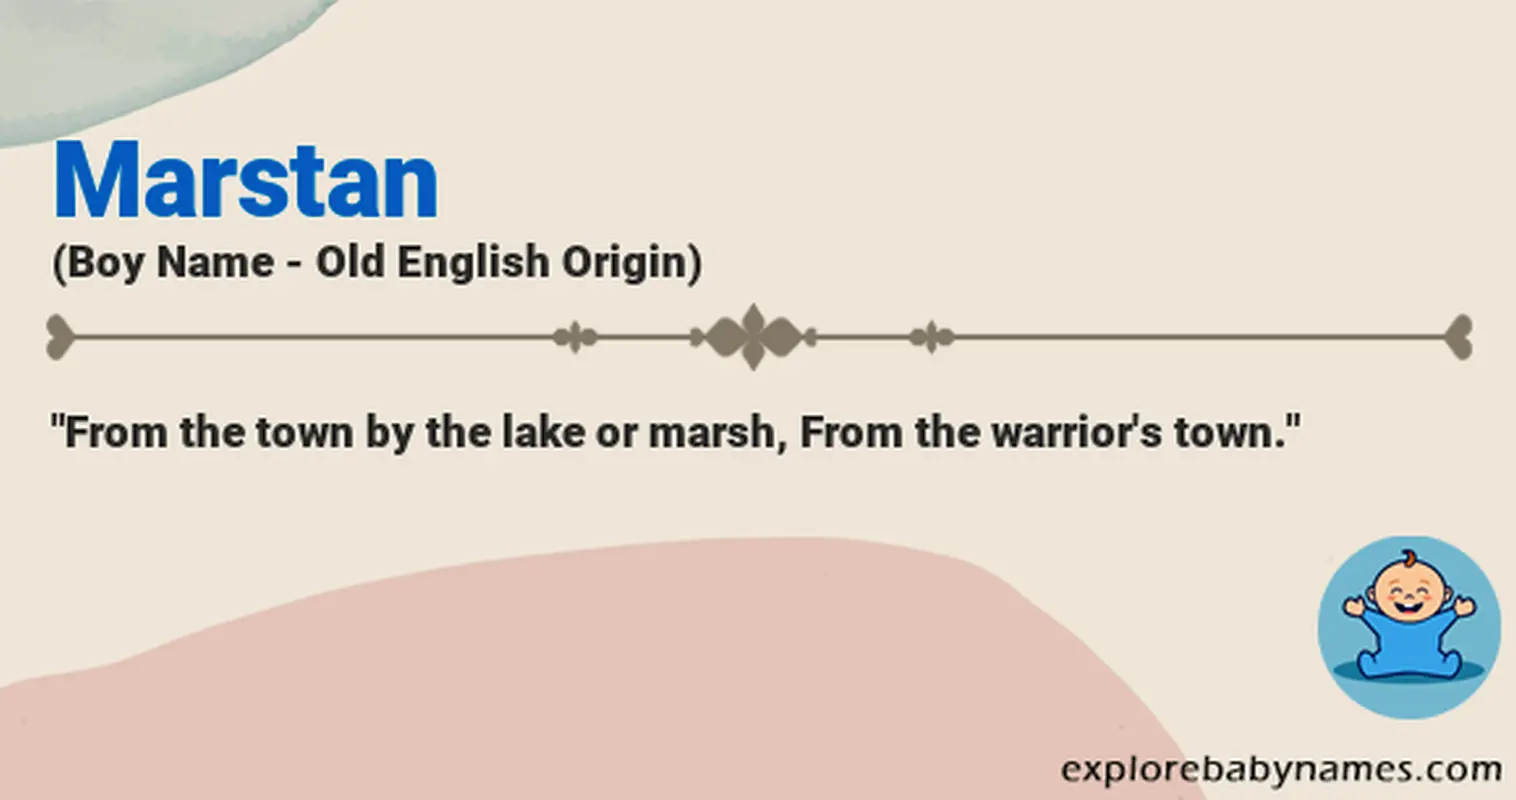 Meaning of Marstan